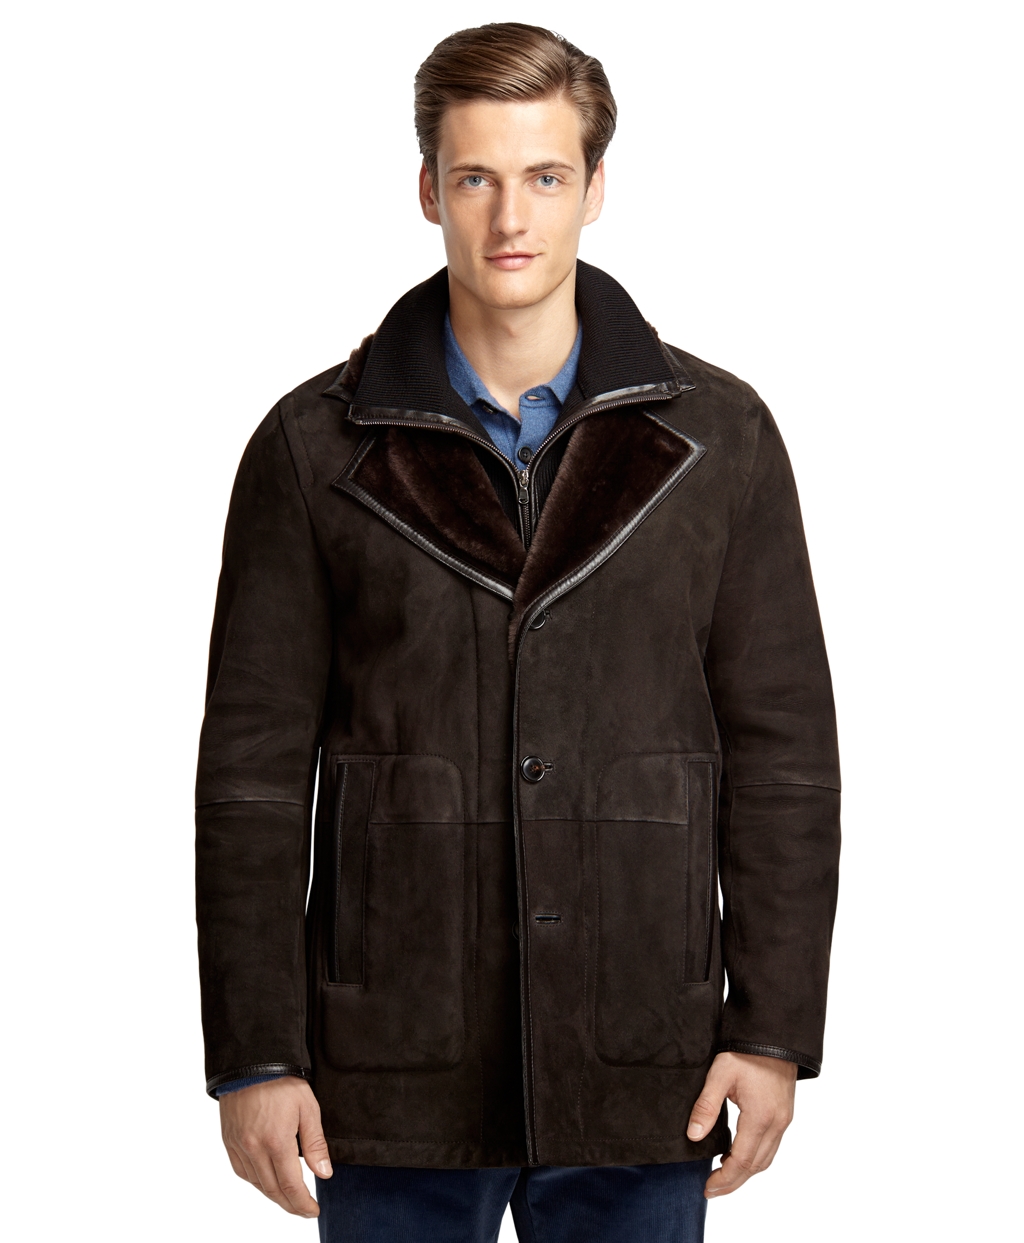 Brooks Brothers Shearling Coat in Brown for Men - Lyst